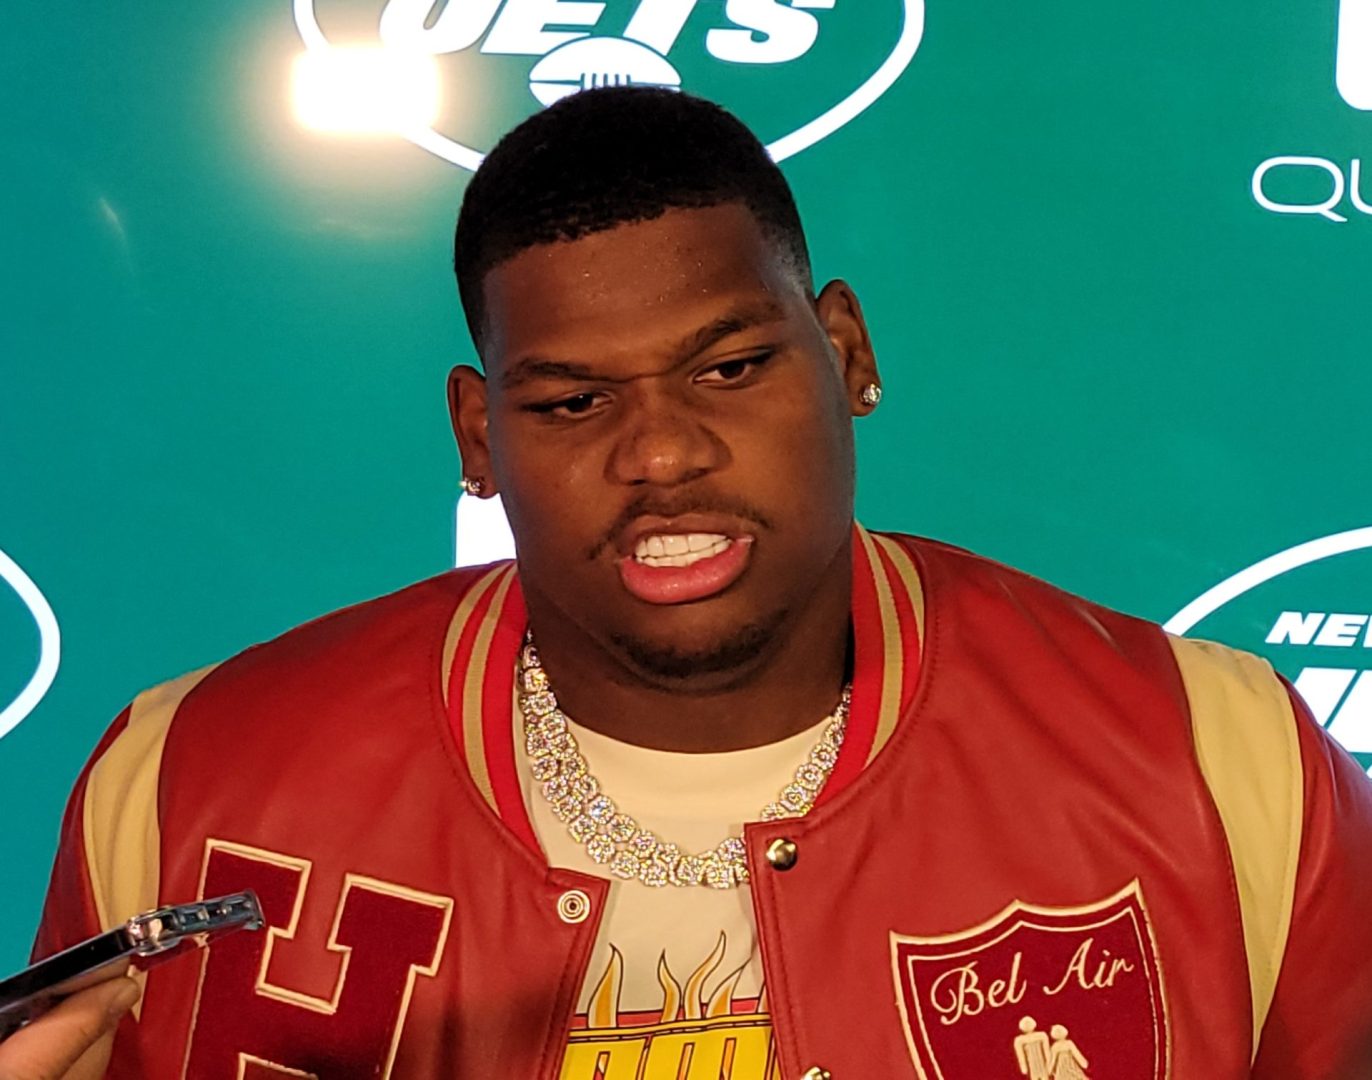 Quinnen Williams of the New York Jets speaks to the media (Photo by Derrel Jazz Johnson for rolling out)